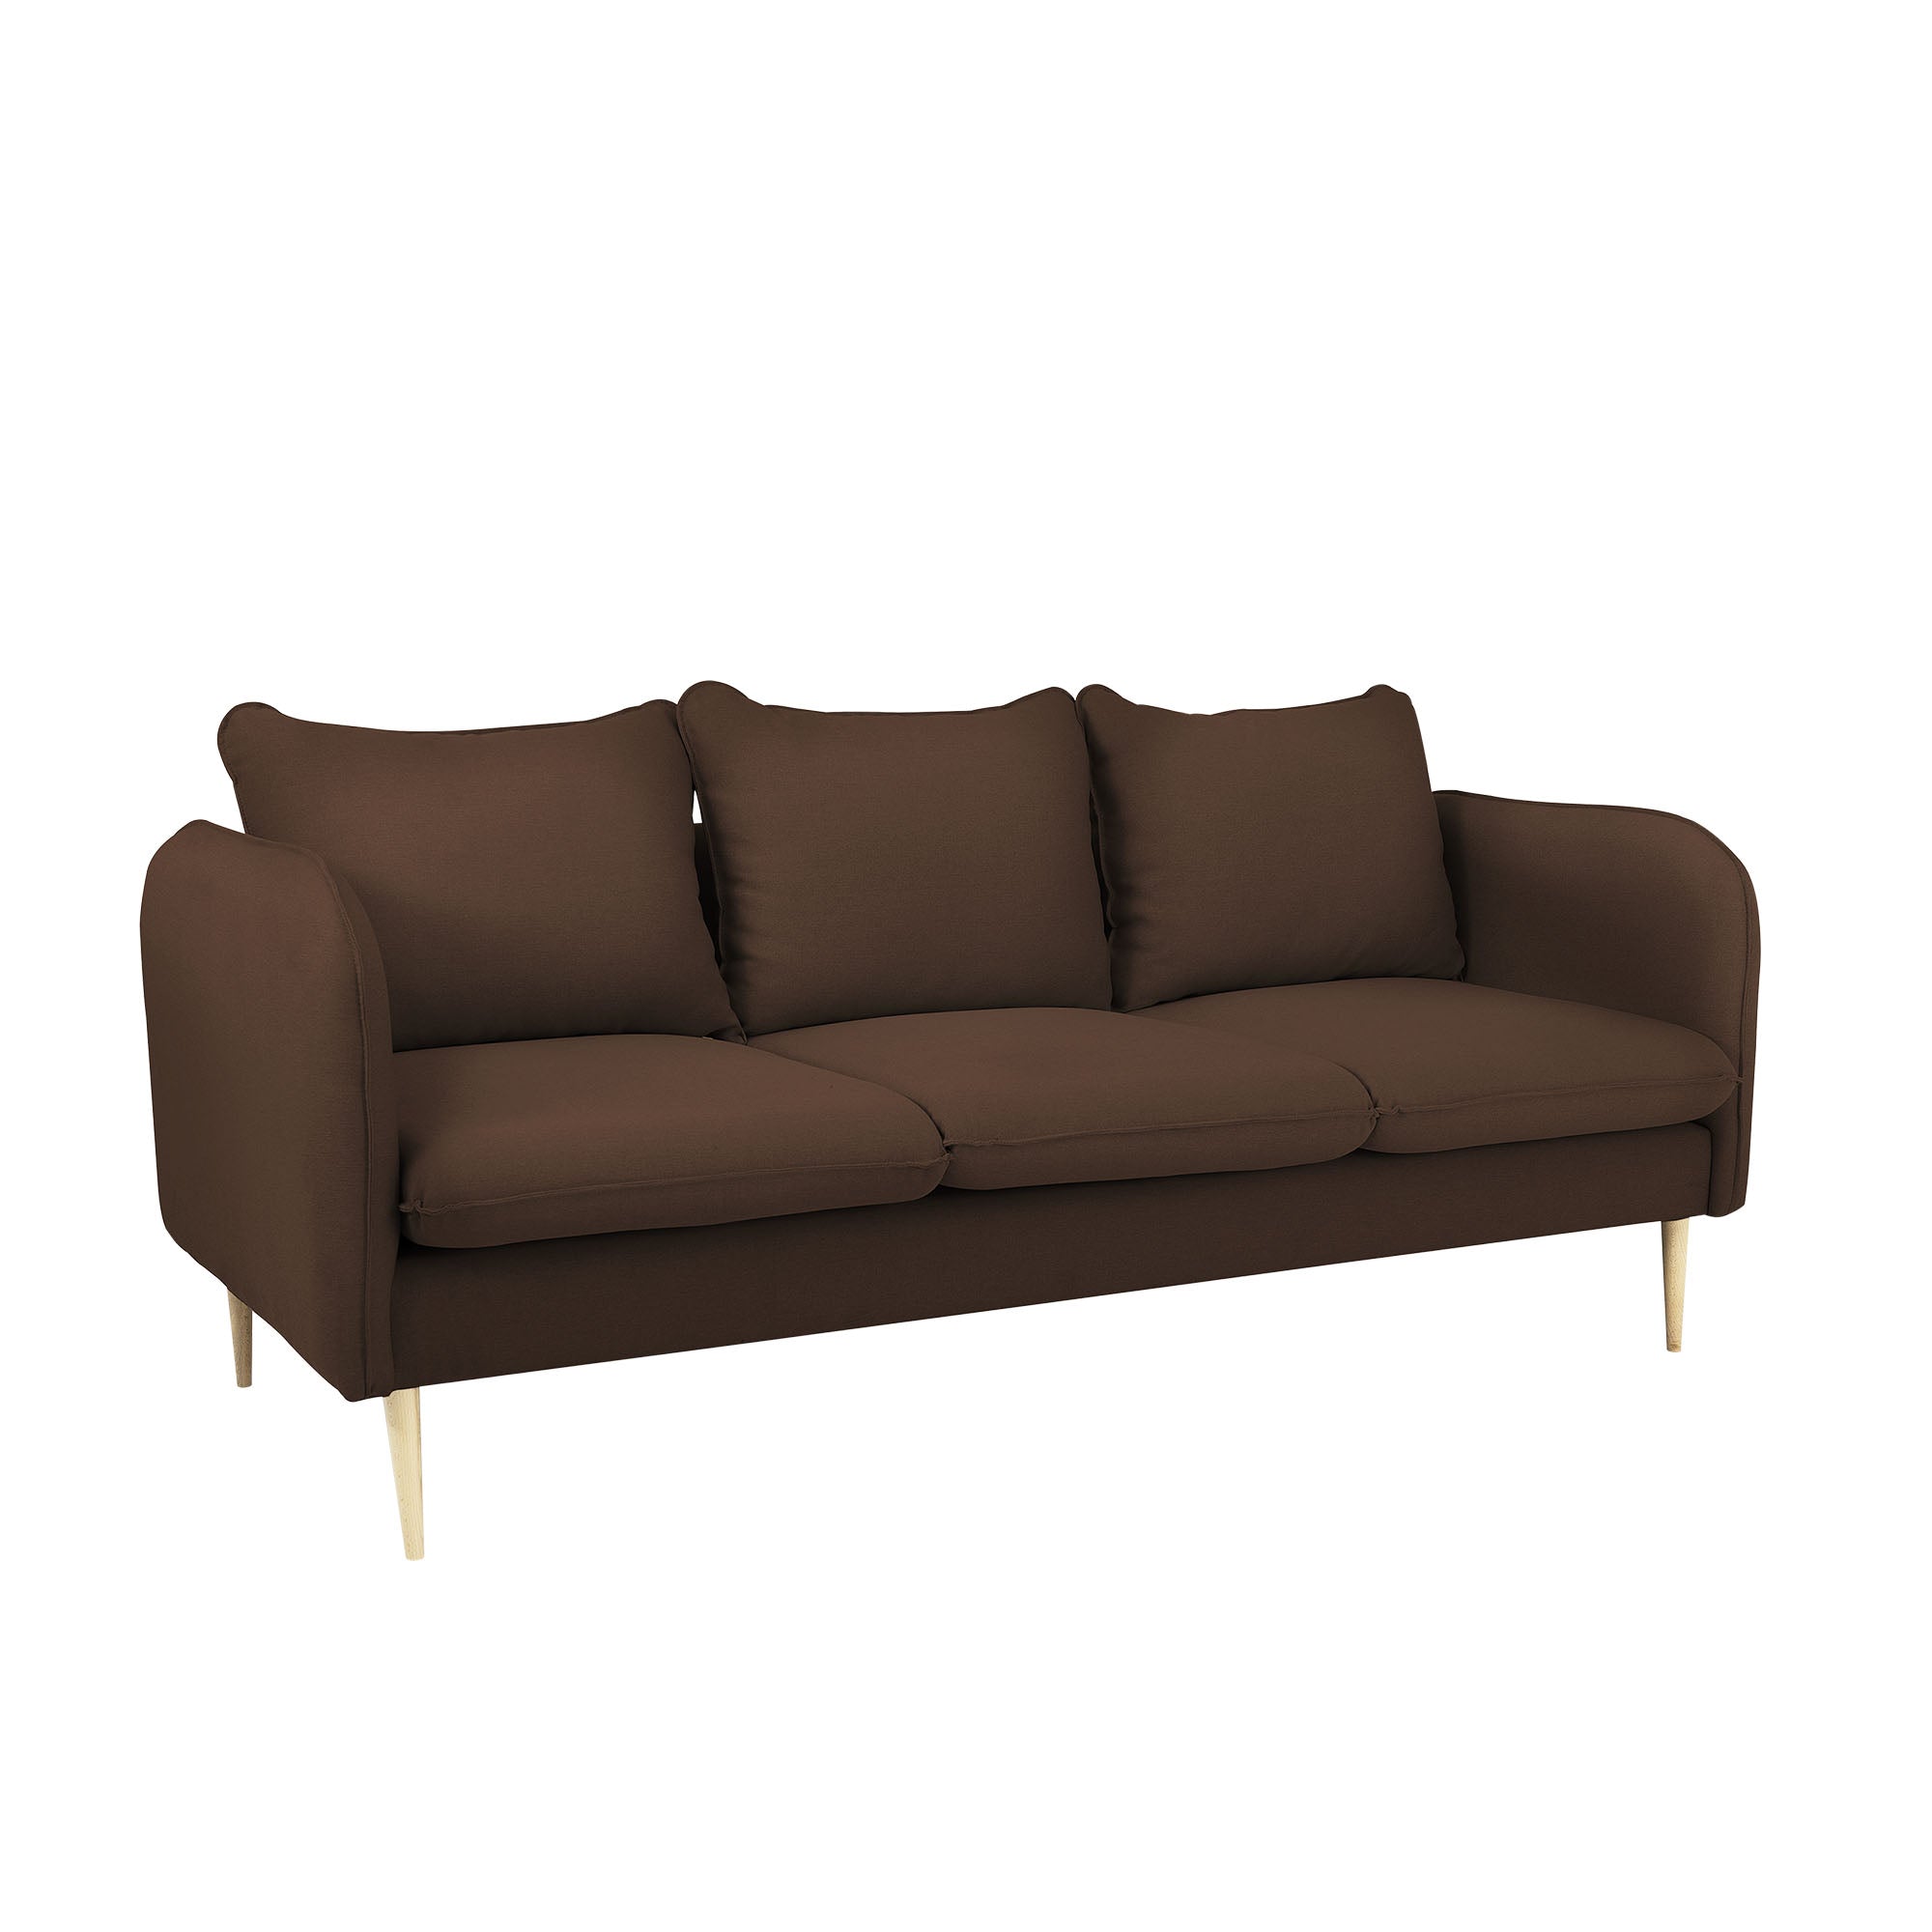 POSH WOOD Sofa 3 Seaters upholstery colour brown